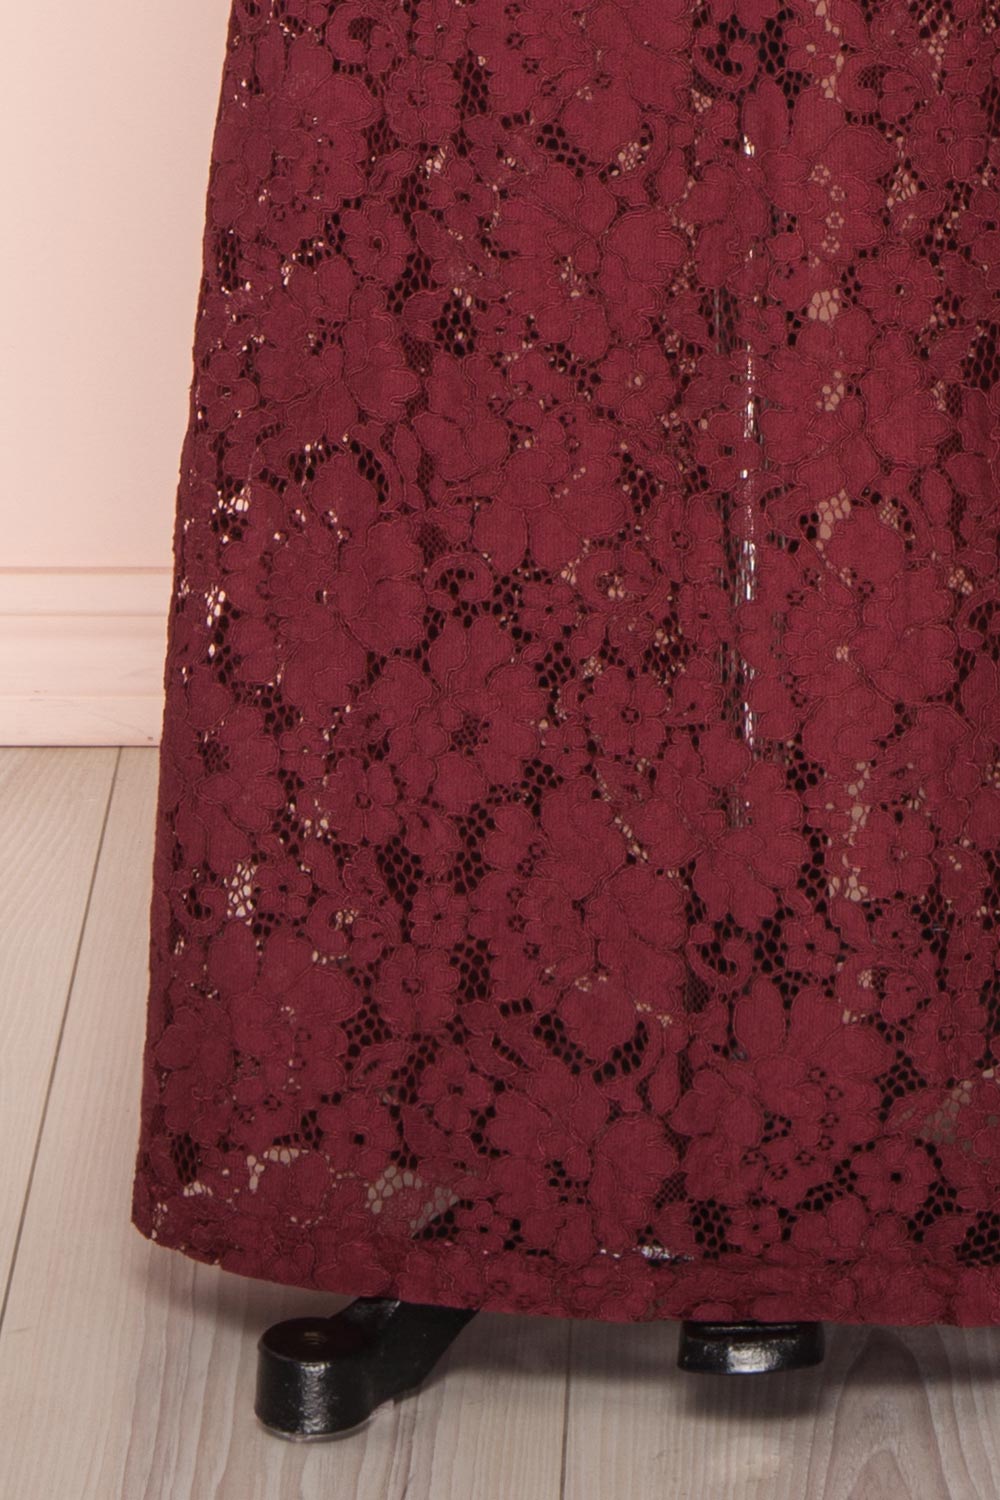 Ahouva | Burgundy Lace Gown